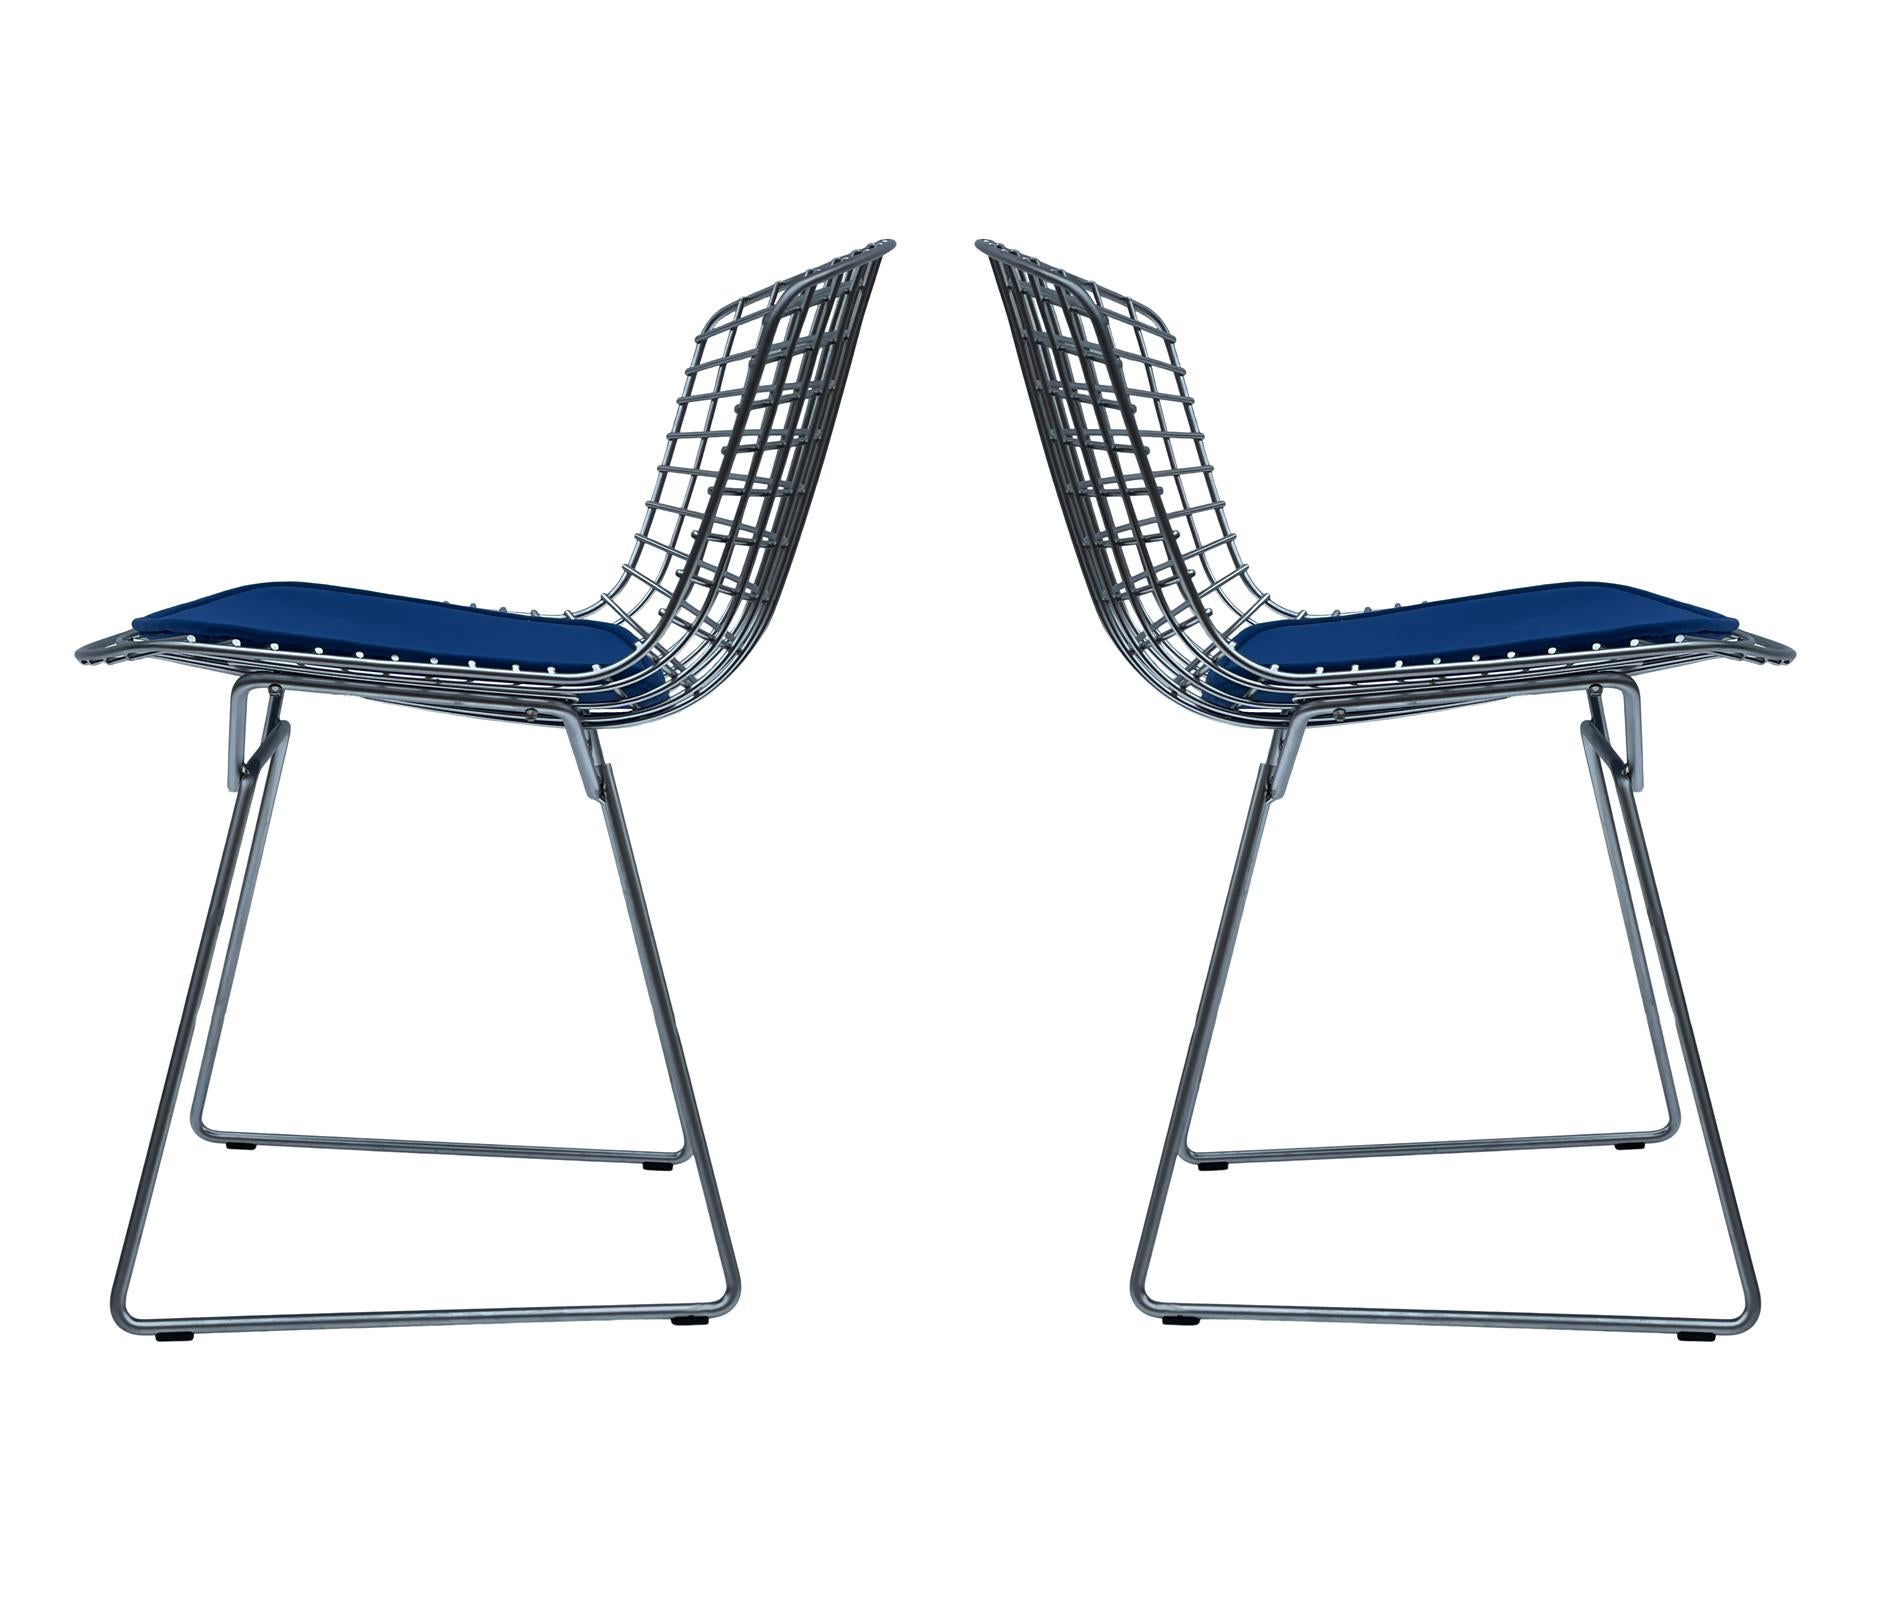 American Pair of Mid-Century Modern Wire Side or Dining Chairs by Harry Bertoia for Knoll